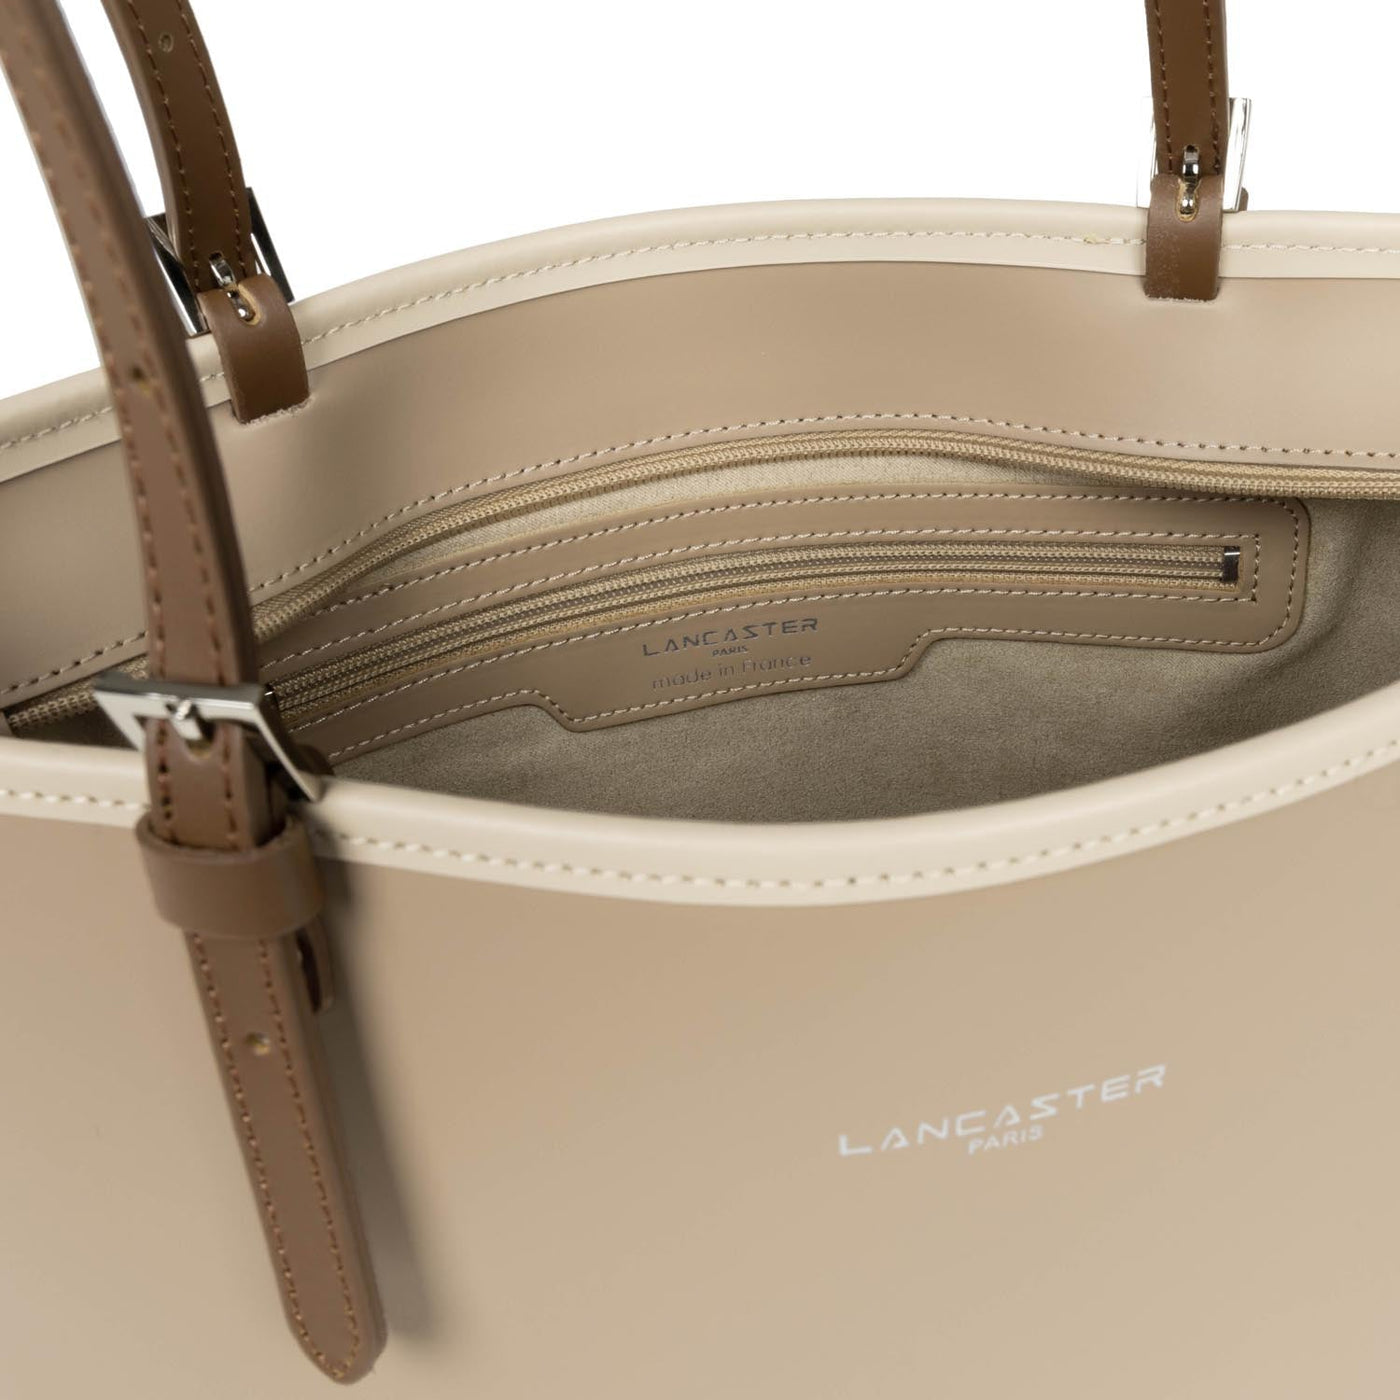 m tote bag - smooth #couleur_nude-nude-clair-vison